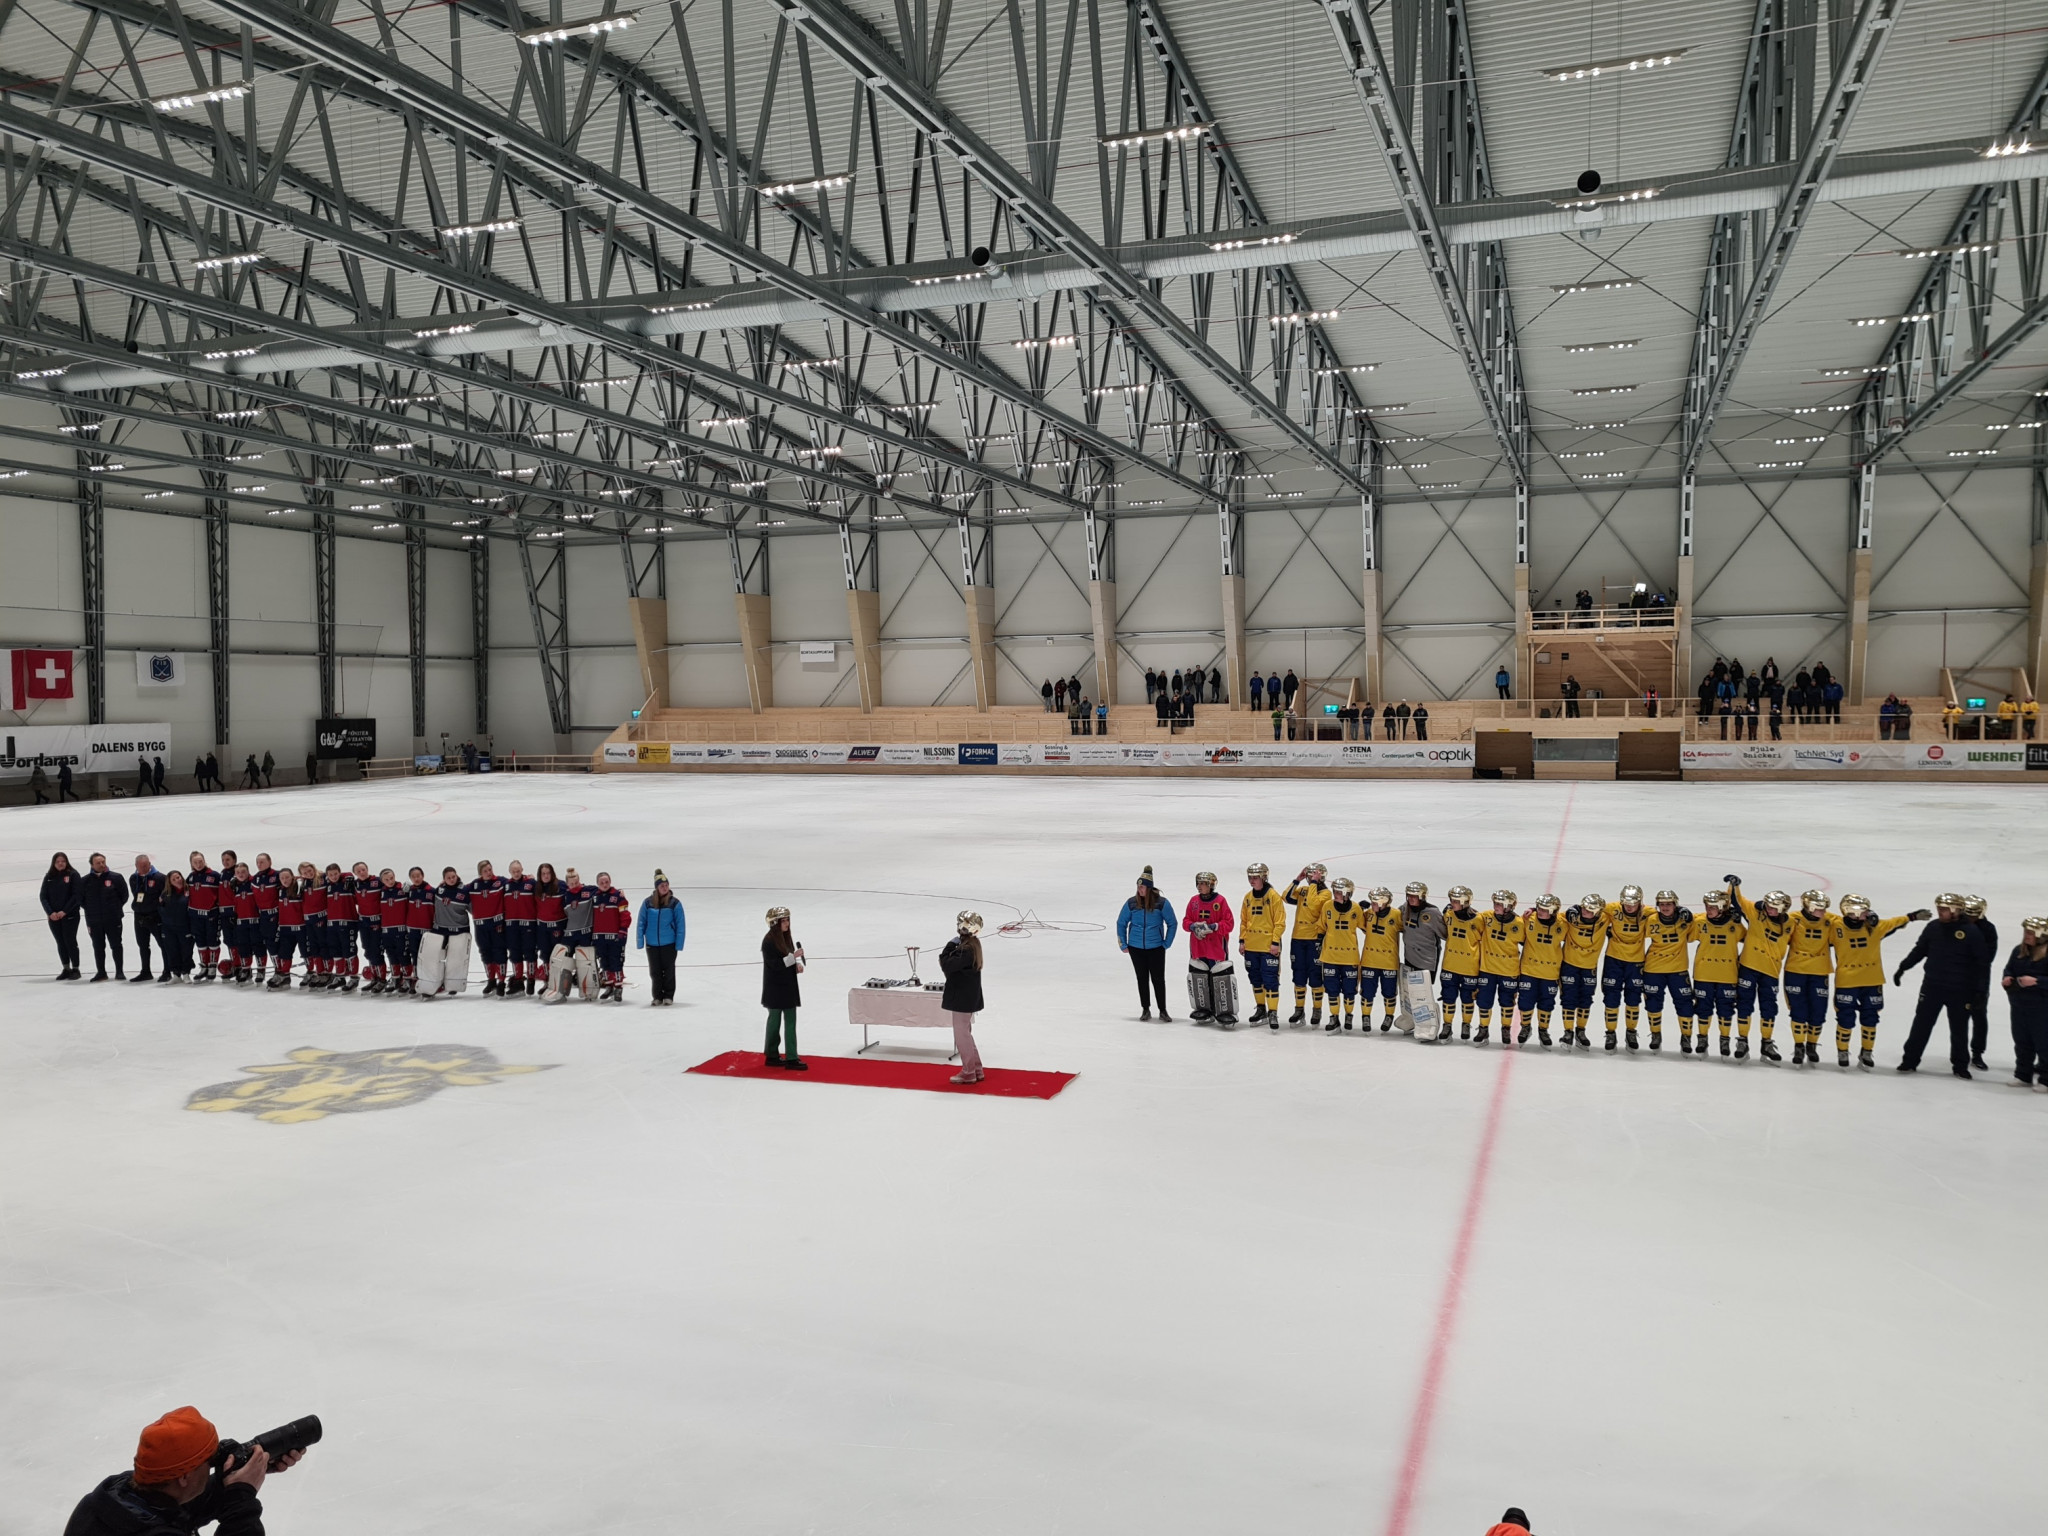 Sweden overcame Norway 12-0 in the gold medal match ©Federation of International Bandy